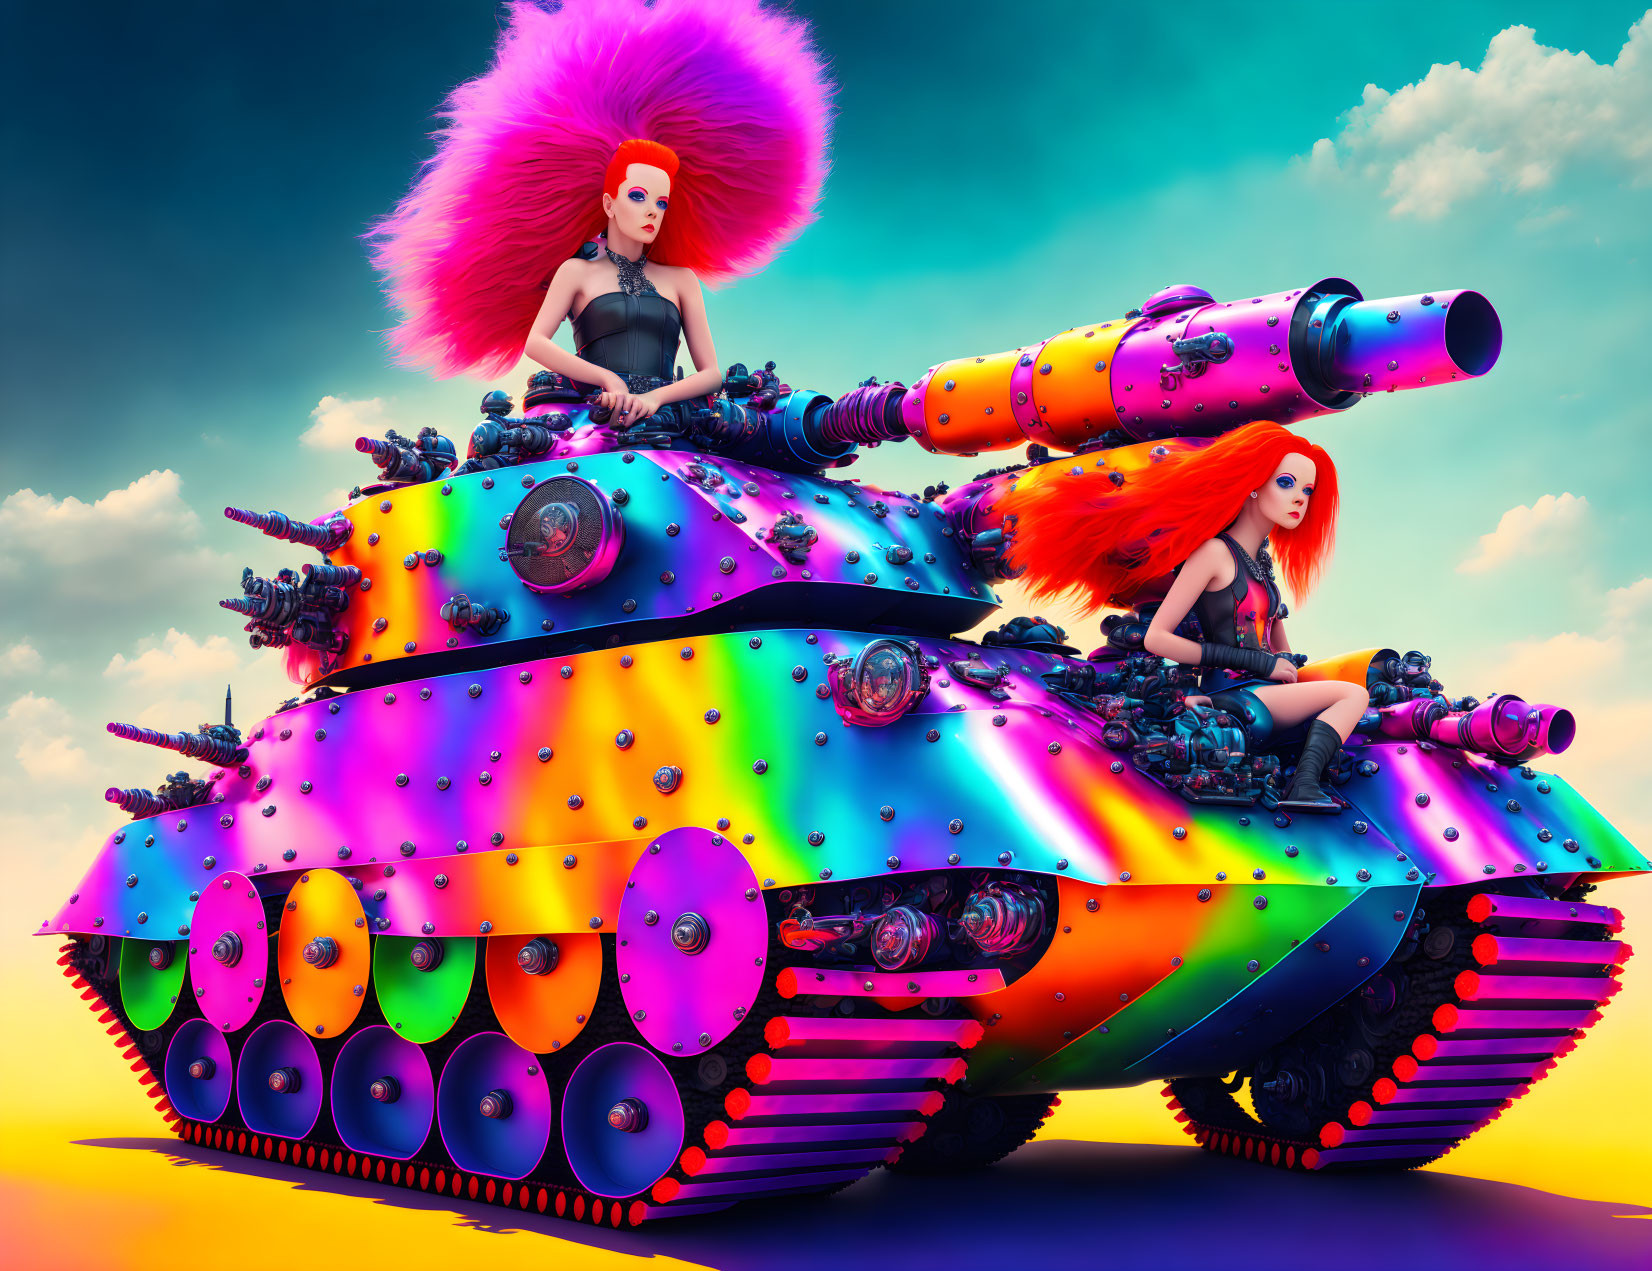 Colorful tank photoshoot with vibrant-haired models against pastel sky